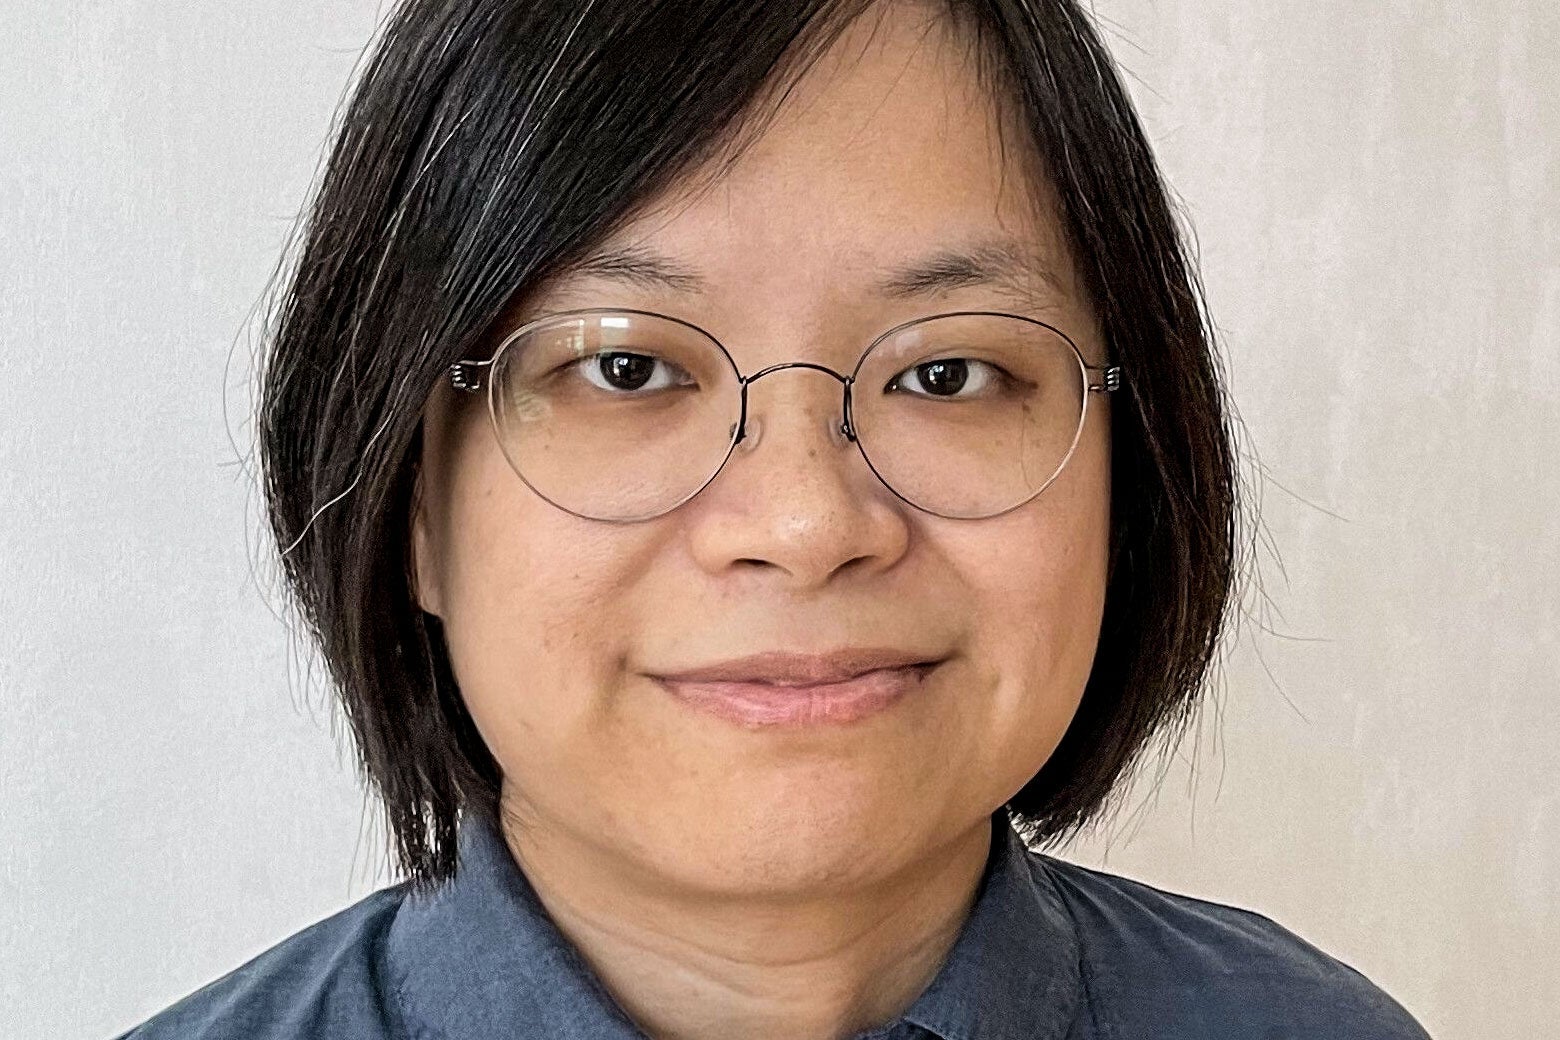 A bespectacled Asian woman stares confidently into the camera.